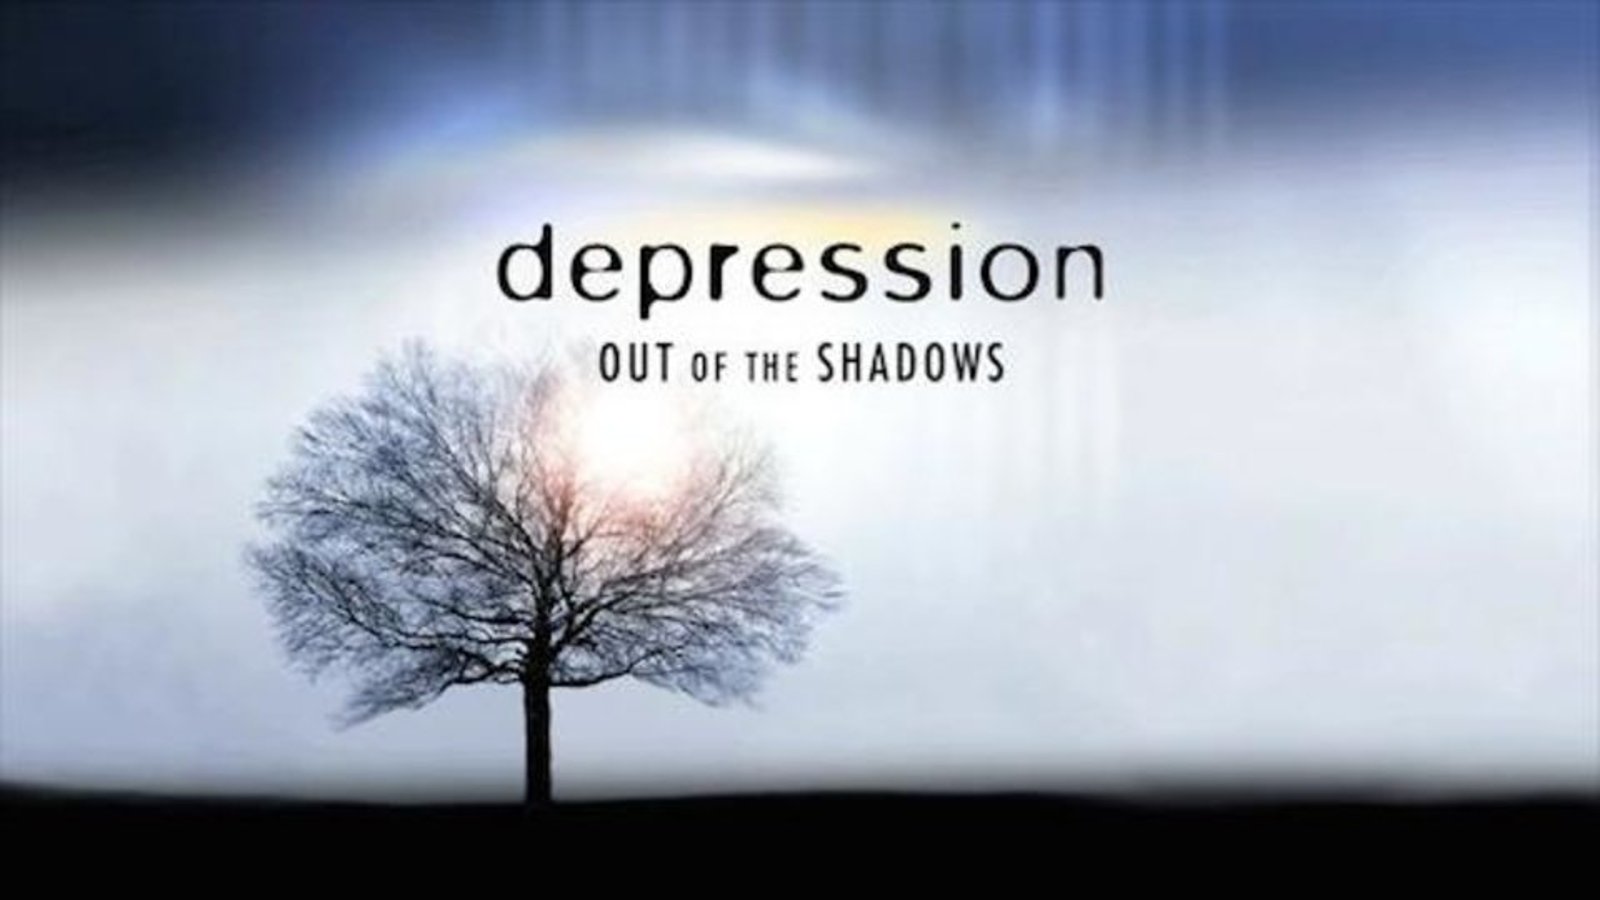 Depression - Out of the Shadows